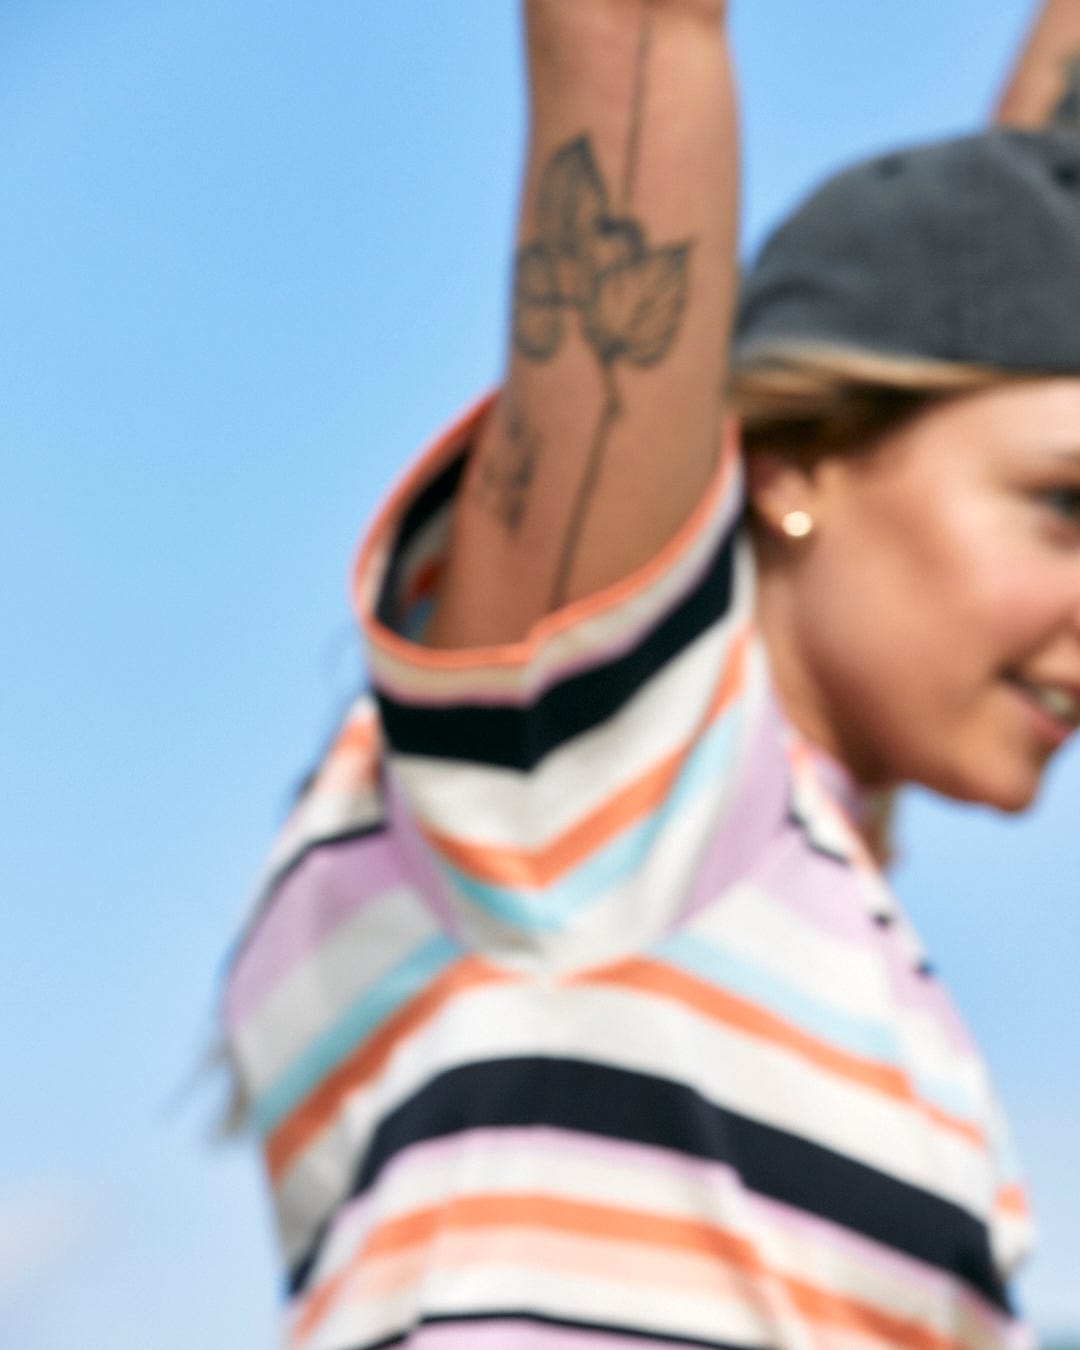 A blurred photo of a person raising their arm to reveal a tattoo, against a blue sky background with an embroidery design on the Saltrock Juno - Womens Short Sleeve T-Shirt - Multi.